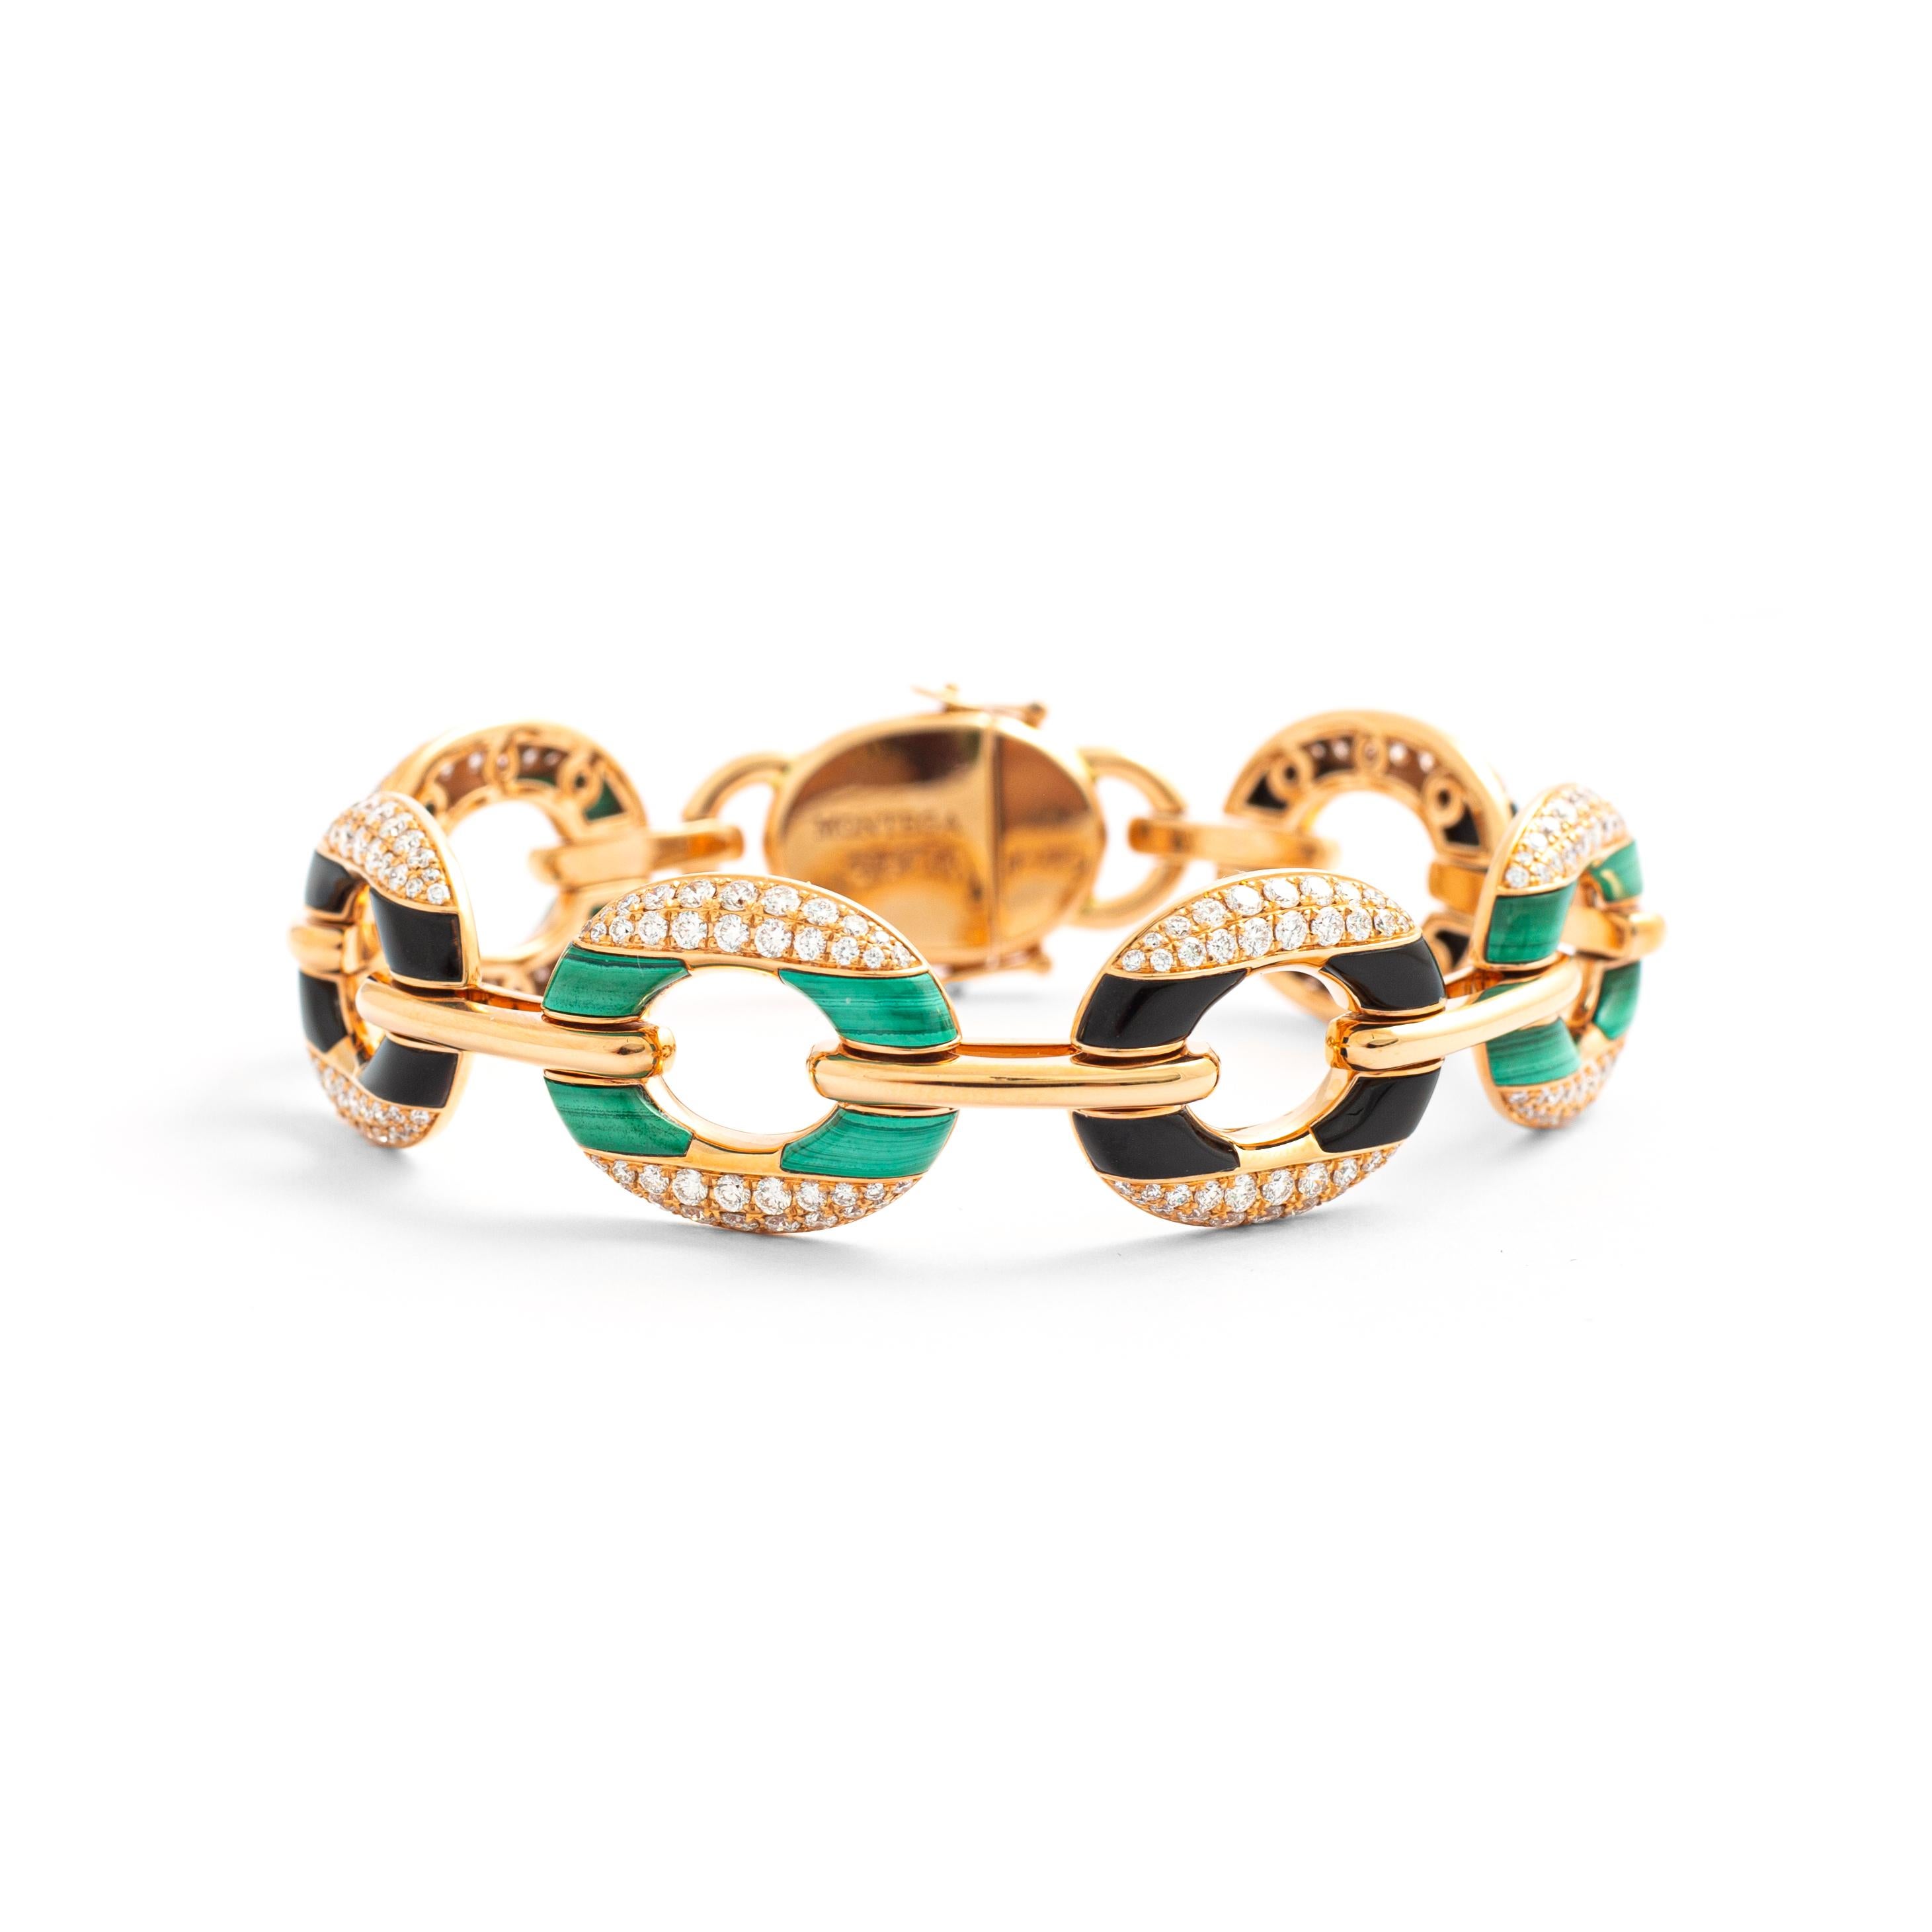 Bracelet in 18kt pink gold set with 257 diamonds 3.75 cts, 12 onyx 5.30 cts and 12 malachites 7.70 cts